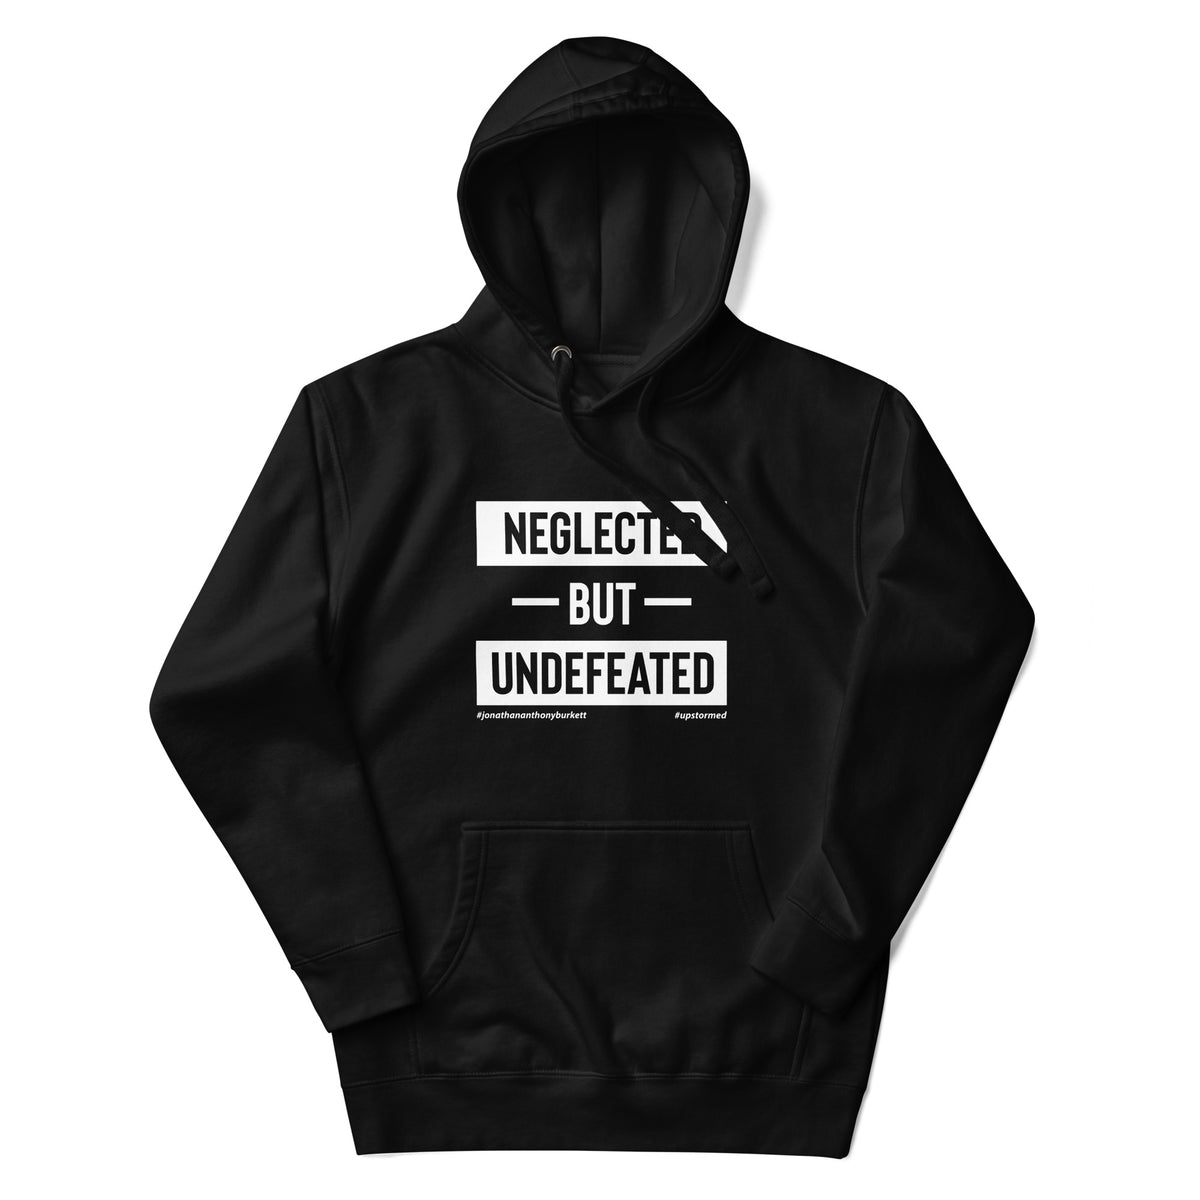 Neglected but Undefeated Upstormed Hoodie